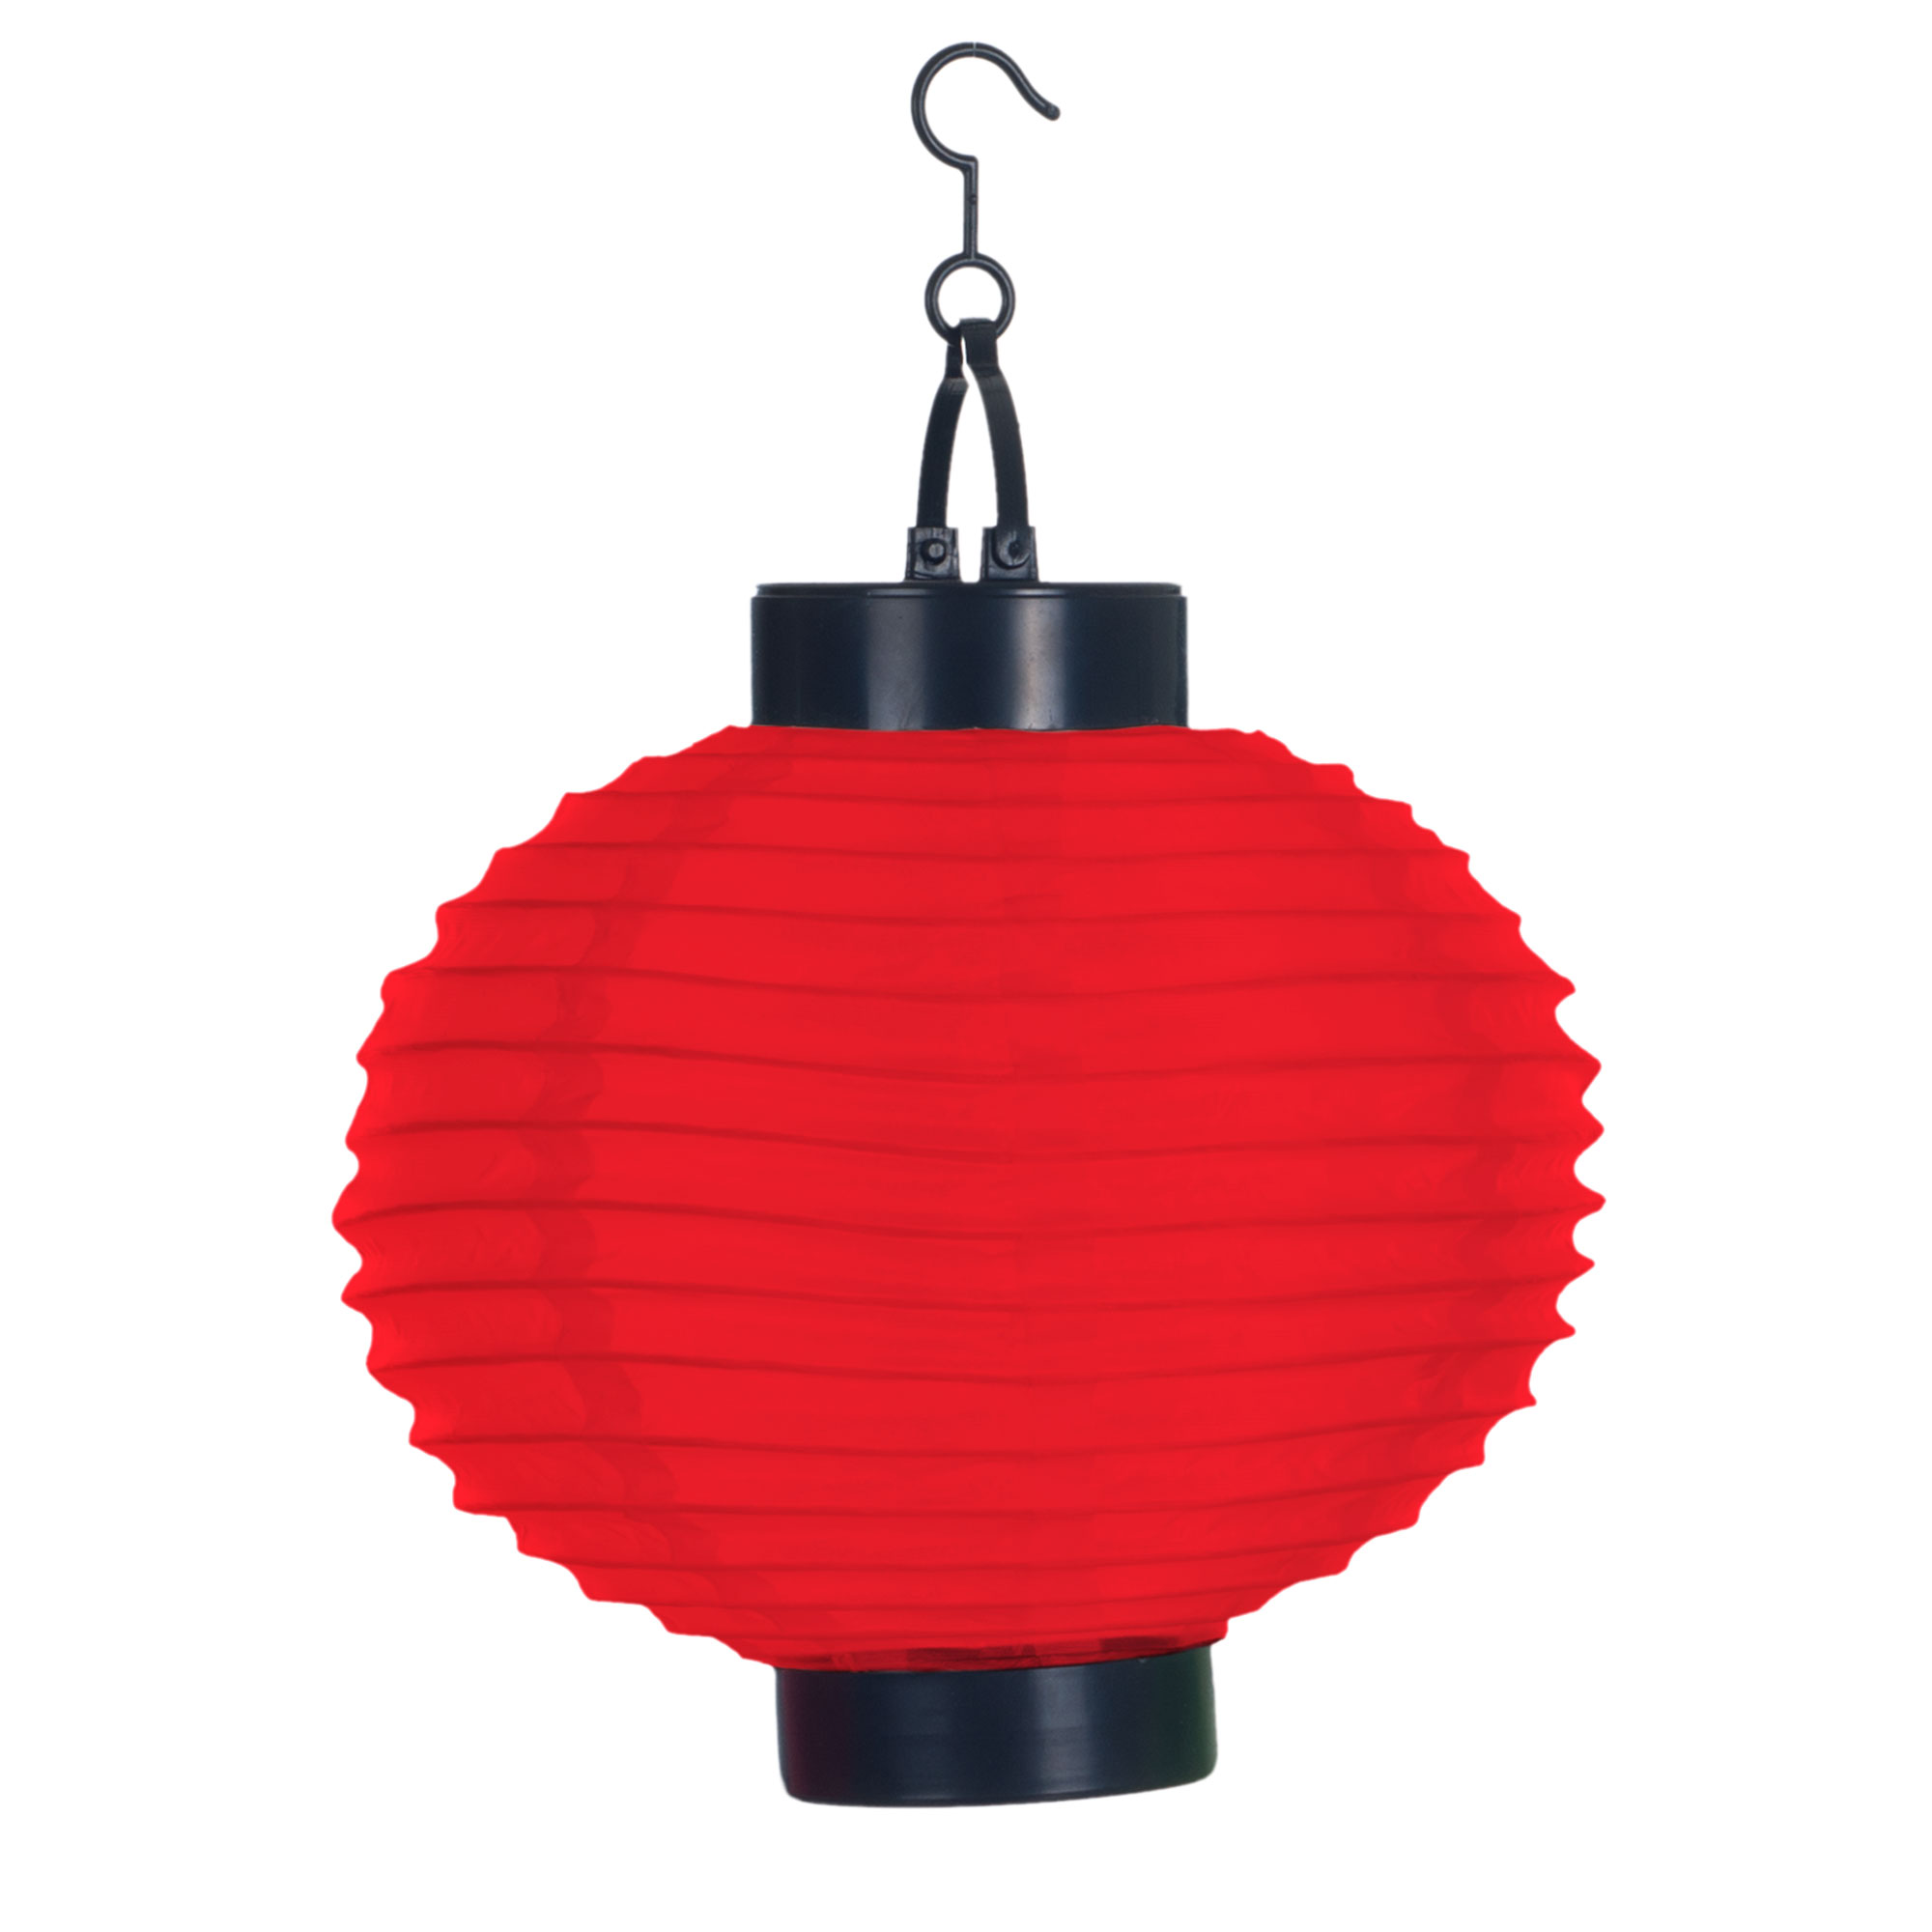 Solar Outdoor Lantern - Hanging Nylon Rechargeable LED Chinese Lighting for Garden, Patio, Gazebo, or Backyard by Pure Garden (Red, Set of 4) - image 2 of 7